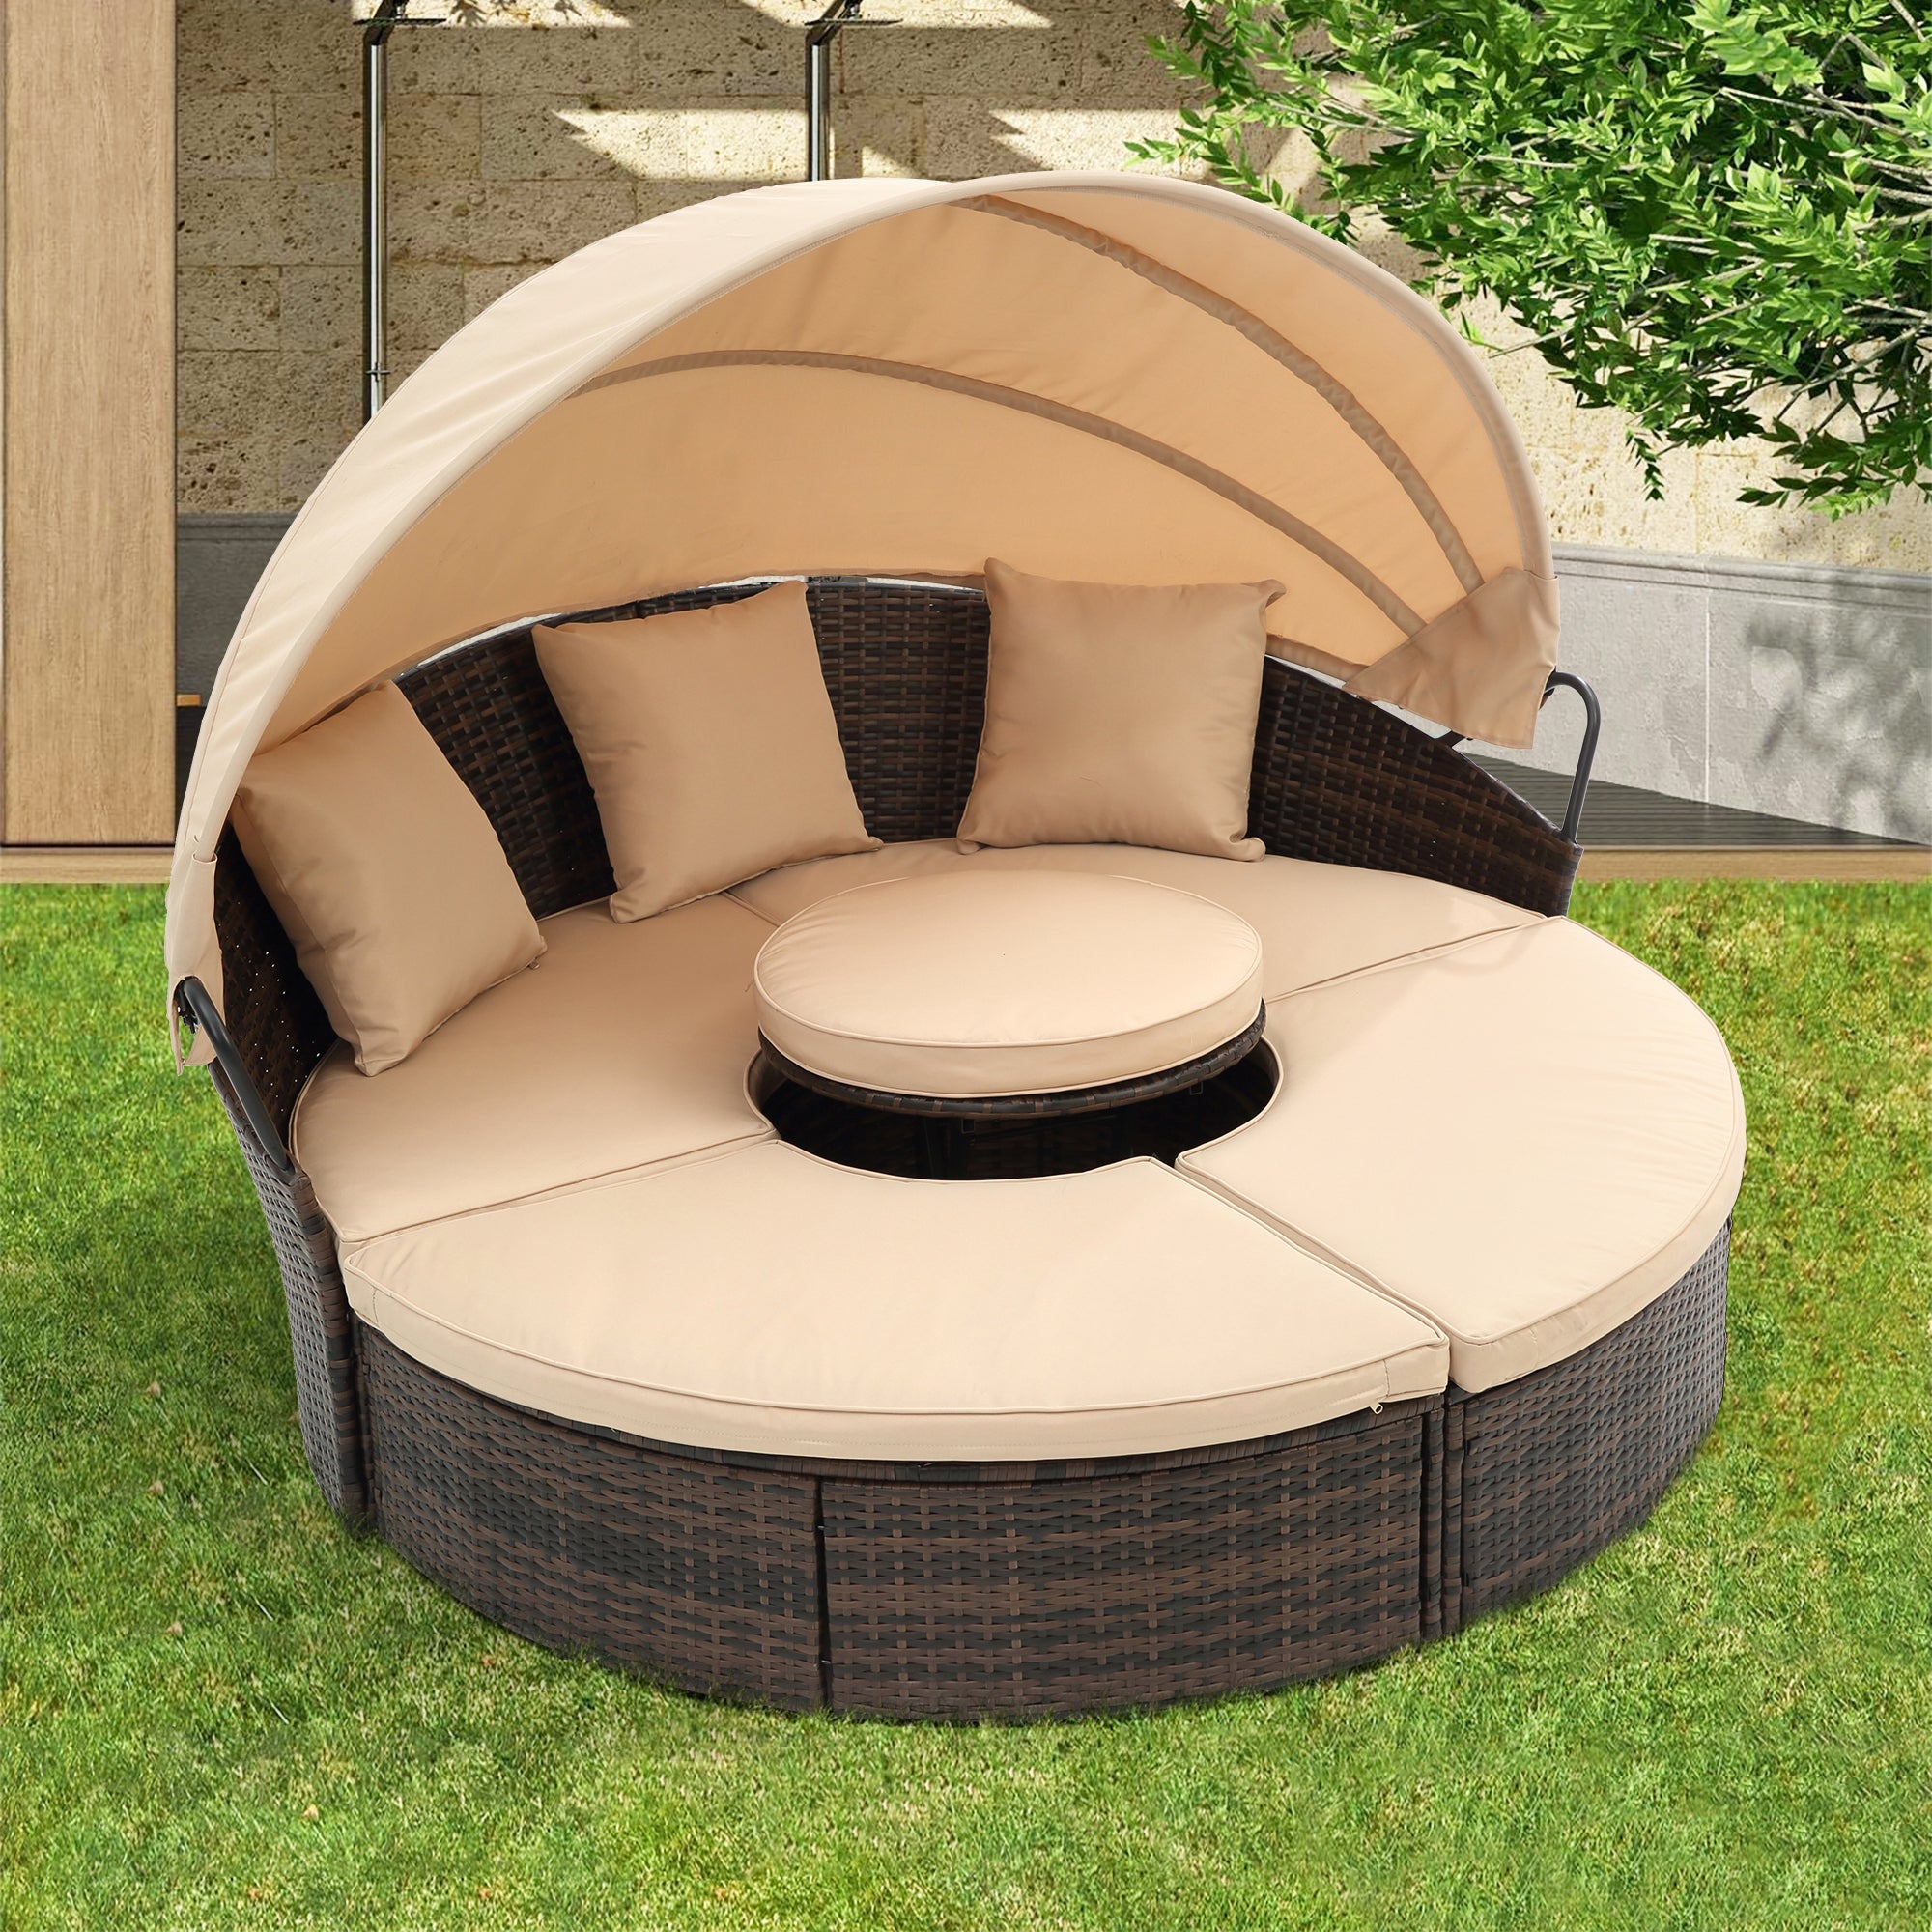 🆓🚛 5 Piece Patio Conversation Set, Rattan Round Lounge with Retractable Canopy, Wicker Outdoor Sofa Bed with Lift Coffee Table, Beige